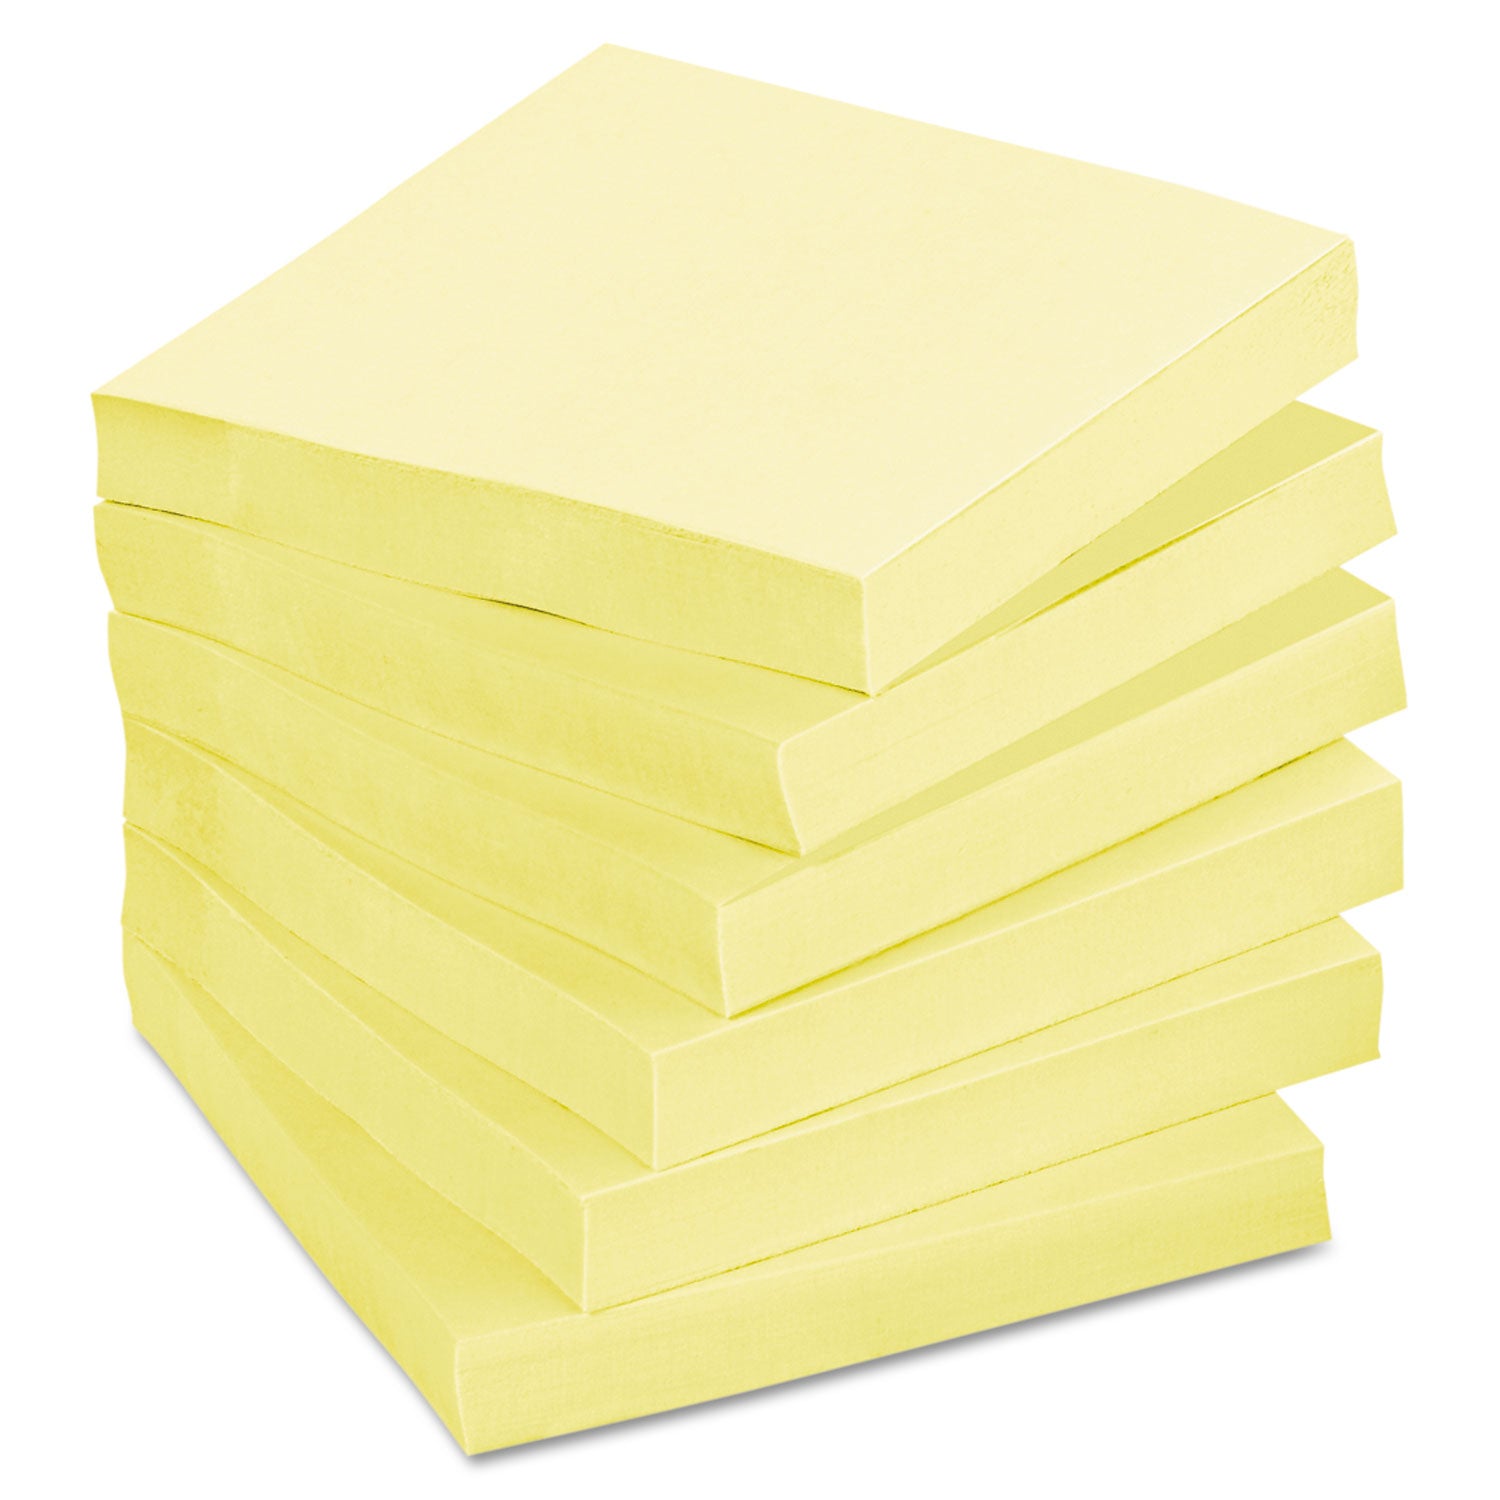 Original Recycled Note Pads, 3" x 3", Canary Yellow, 100 Sheets/Pad, 12 Pads/Pack - 